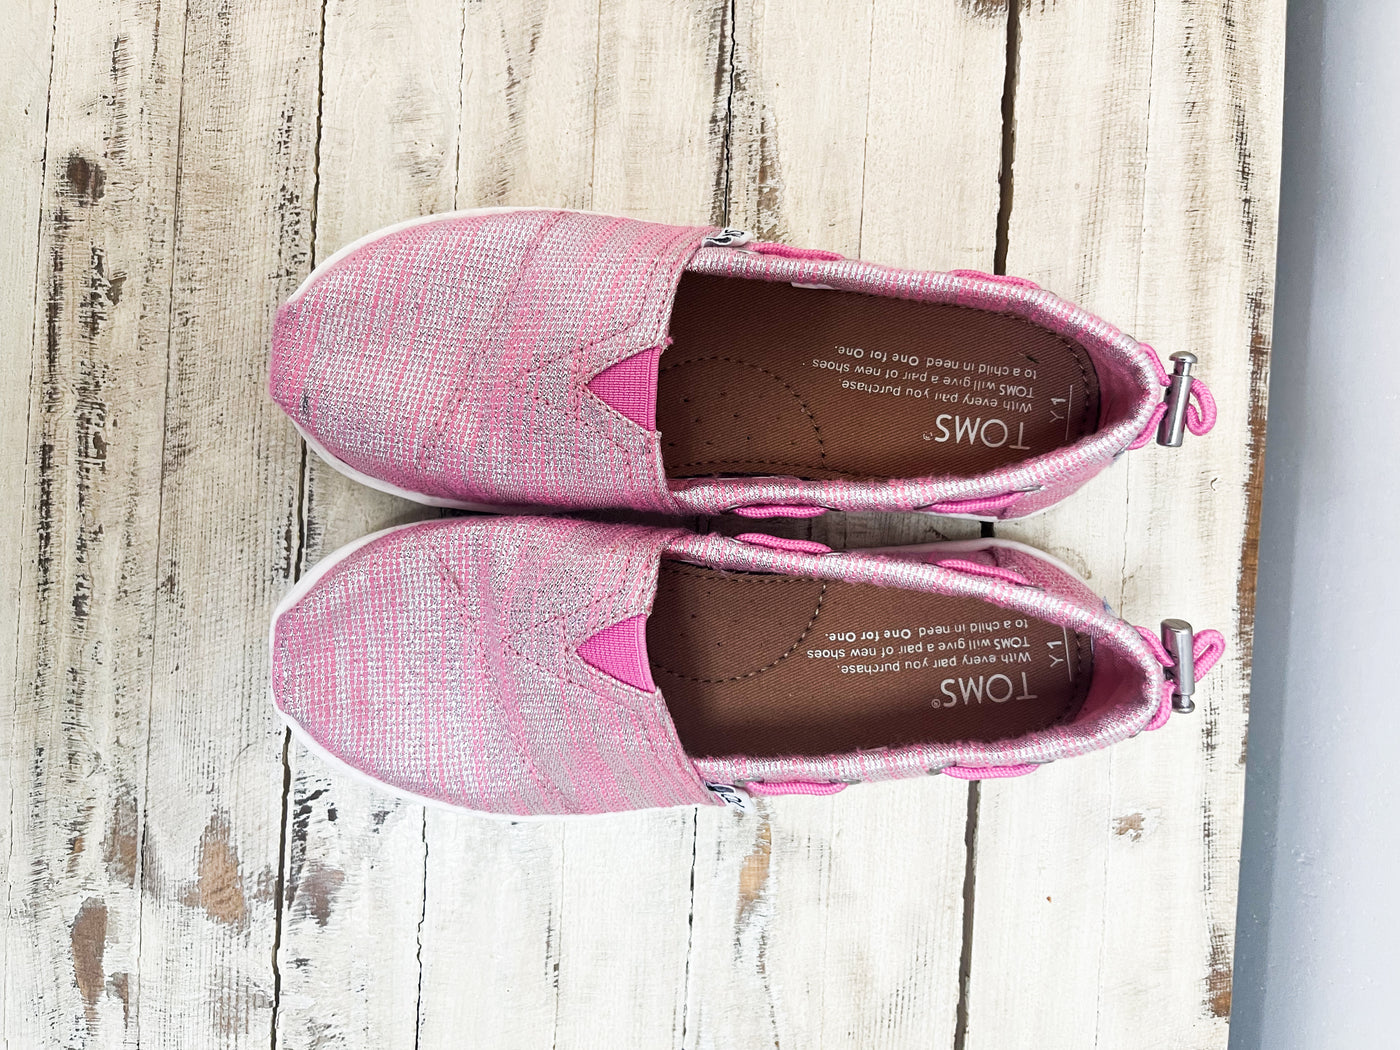 Kids TOMS pink shoes